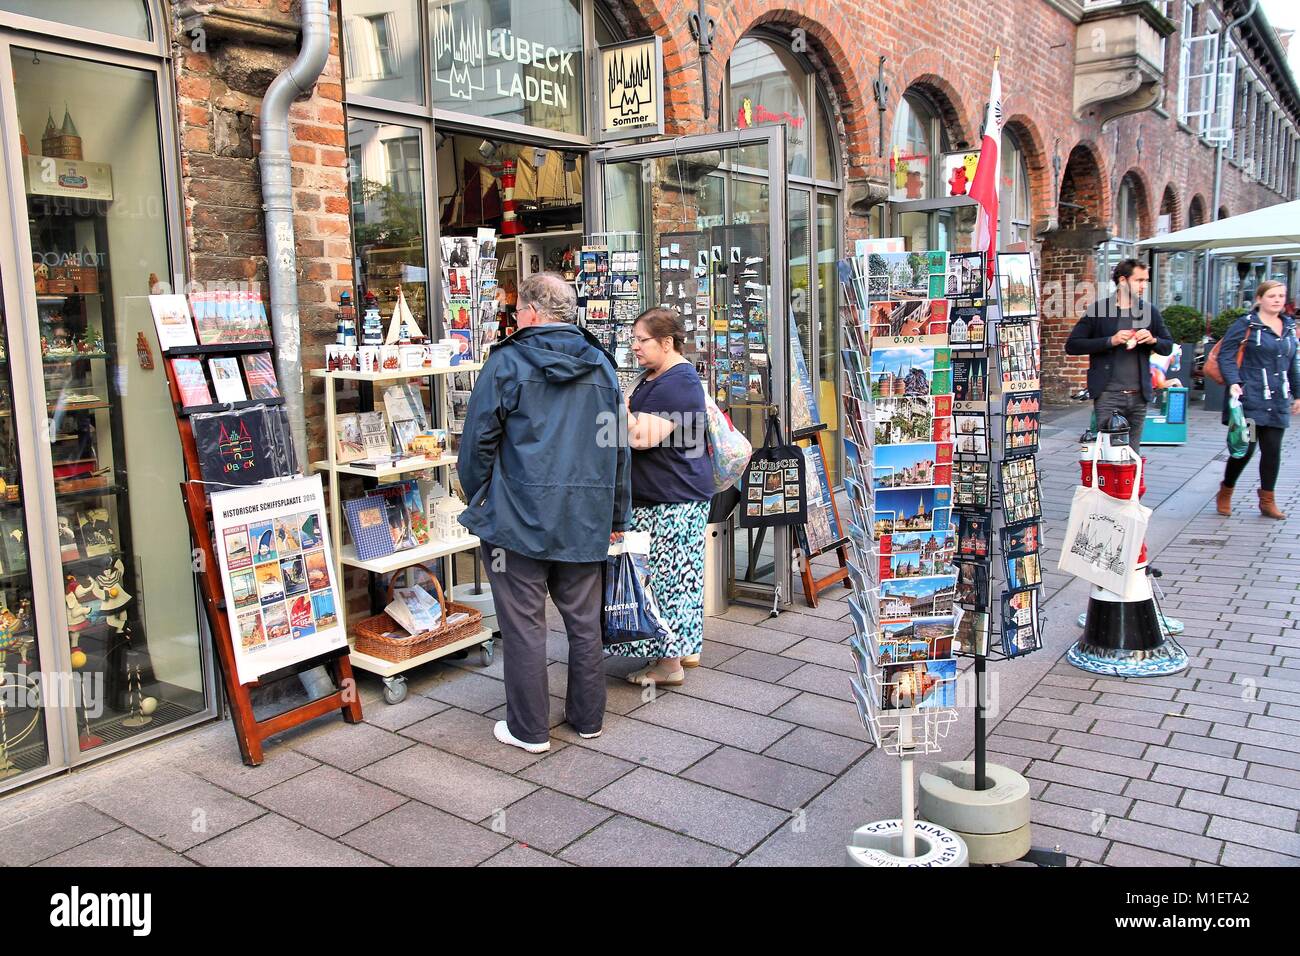 LUBECK, GERMANY - AUGUST 29, 2014: People buy souvenirs in Lubeck, Germany. Lubeck is the 2nd largest city in Schleswig-Holstein region. Its old town  Stock Photo